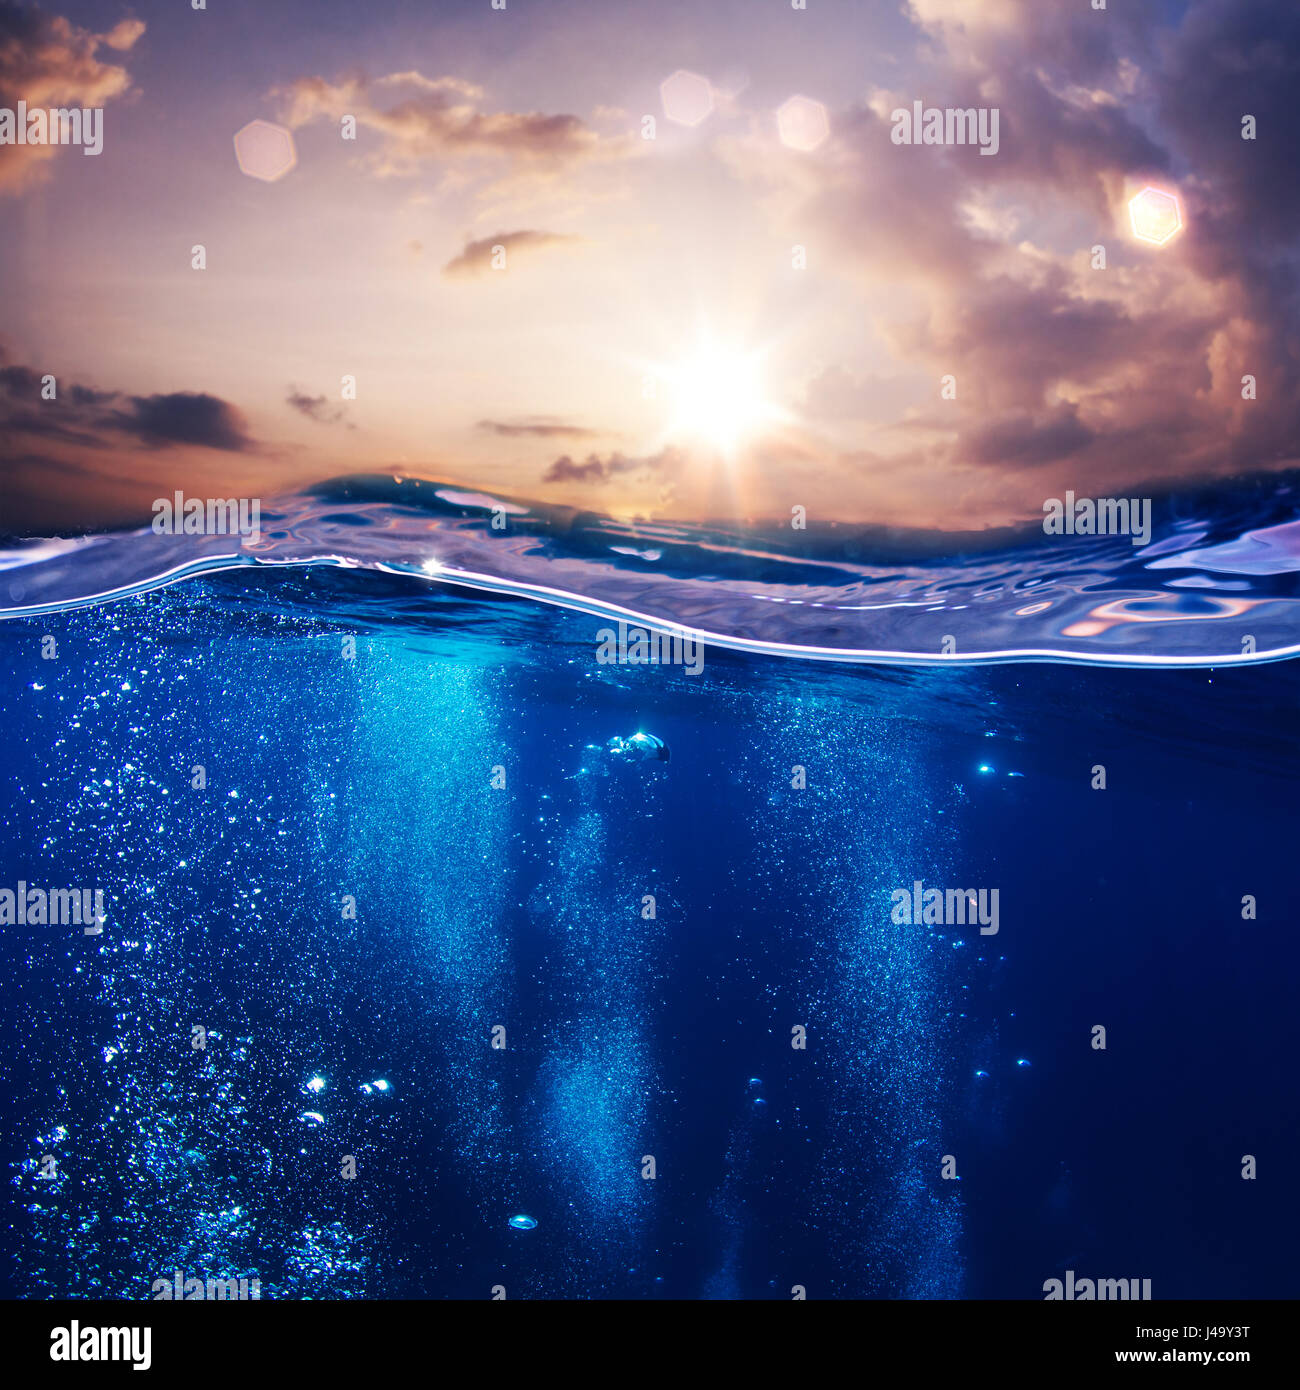 design template with underwater part and sunset skylight splitted by waterline Stock Photo